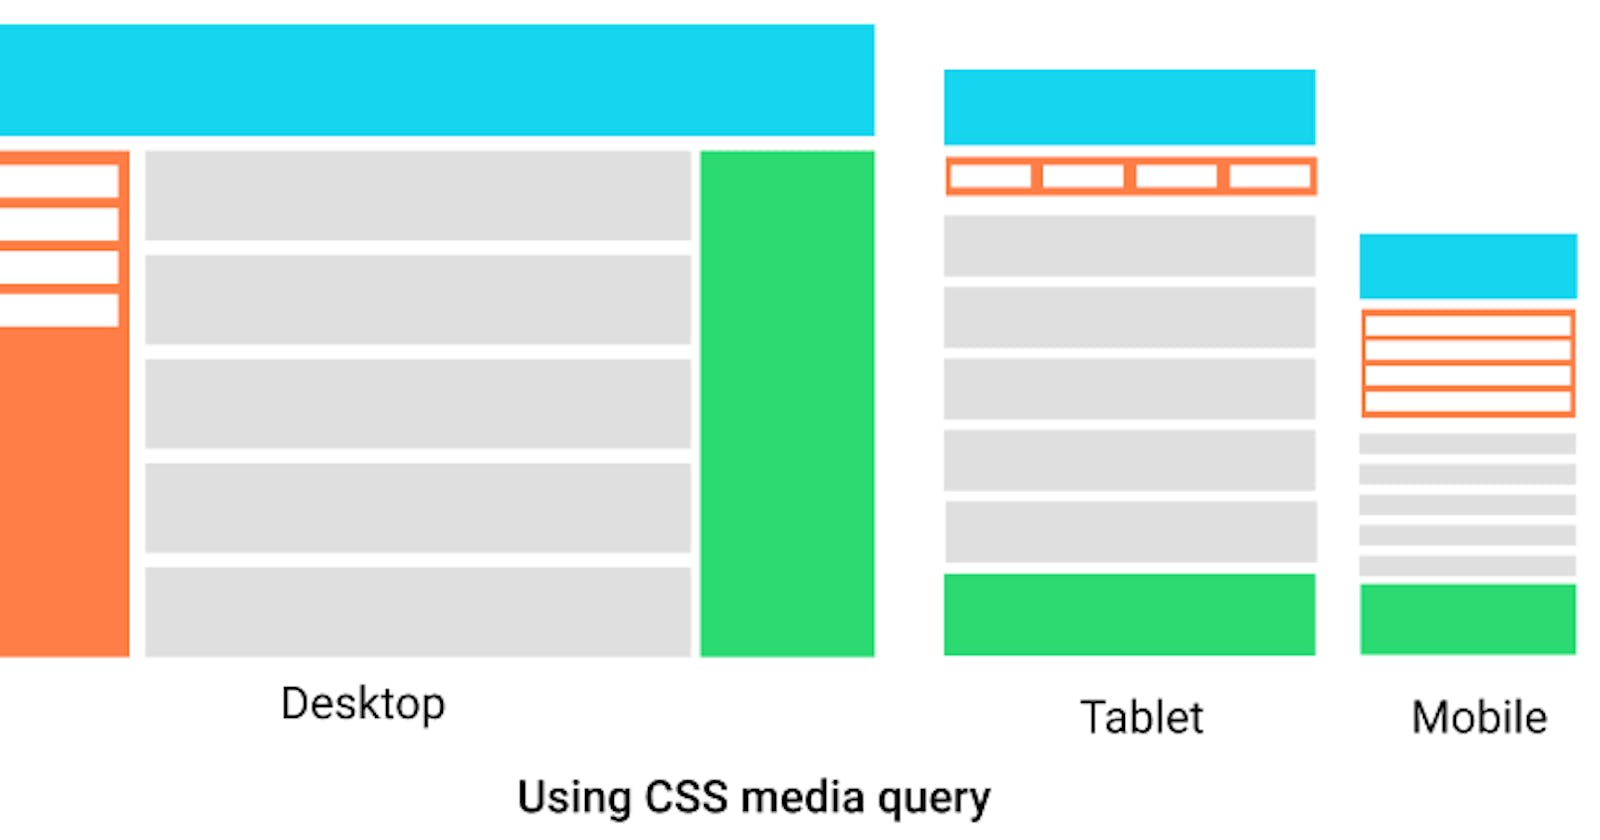 What is Media in CSS?